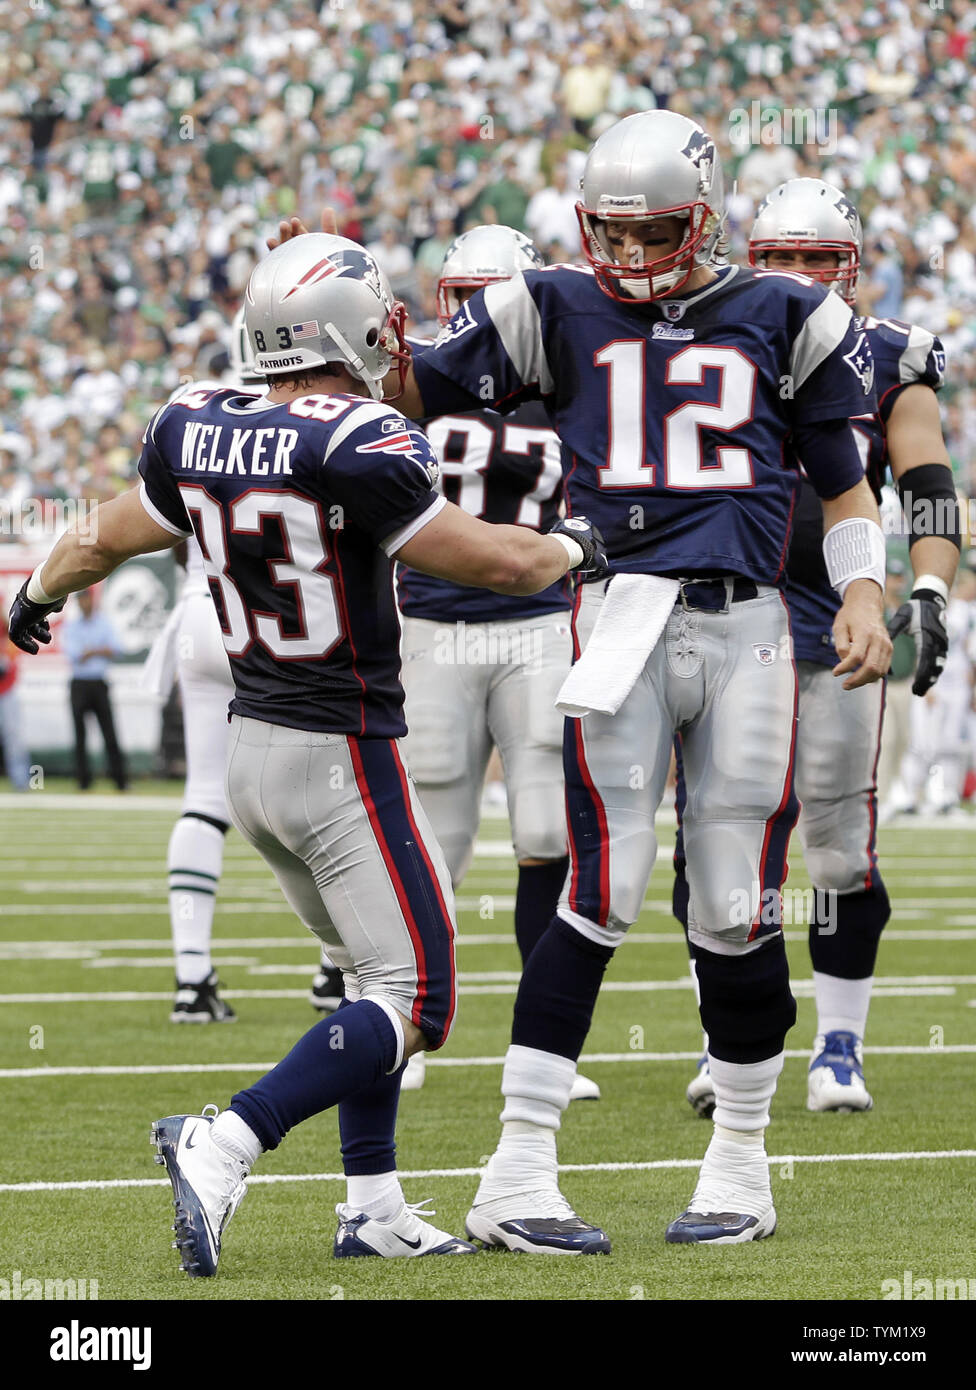 New England Patriots Tom Brady and Wes Welker react after Welker scores on  a 6 yard touchdown catch against the New York Jets in week 2 of the NFL  season at New